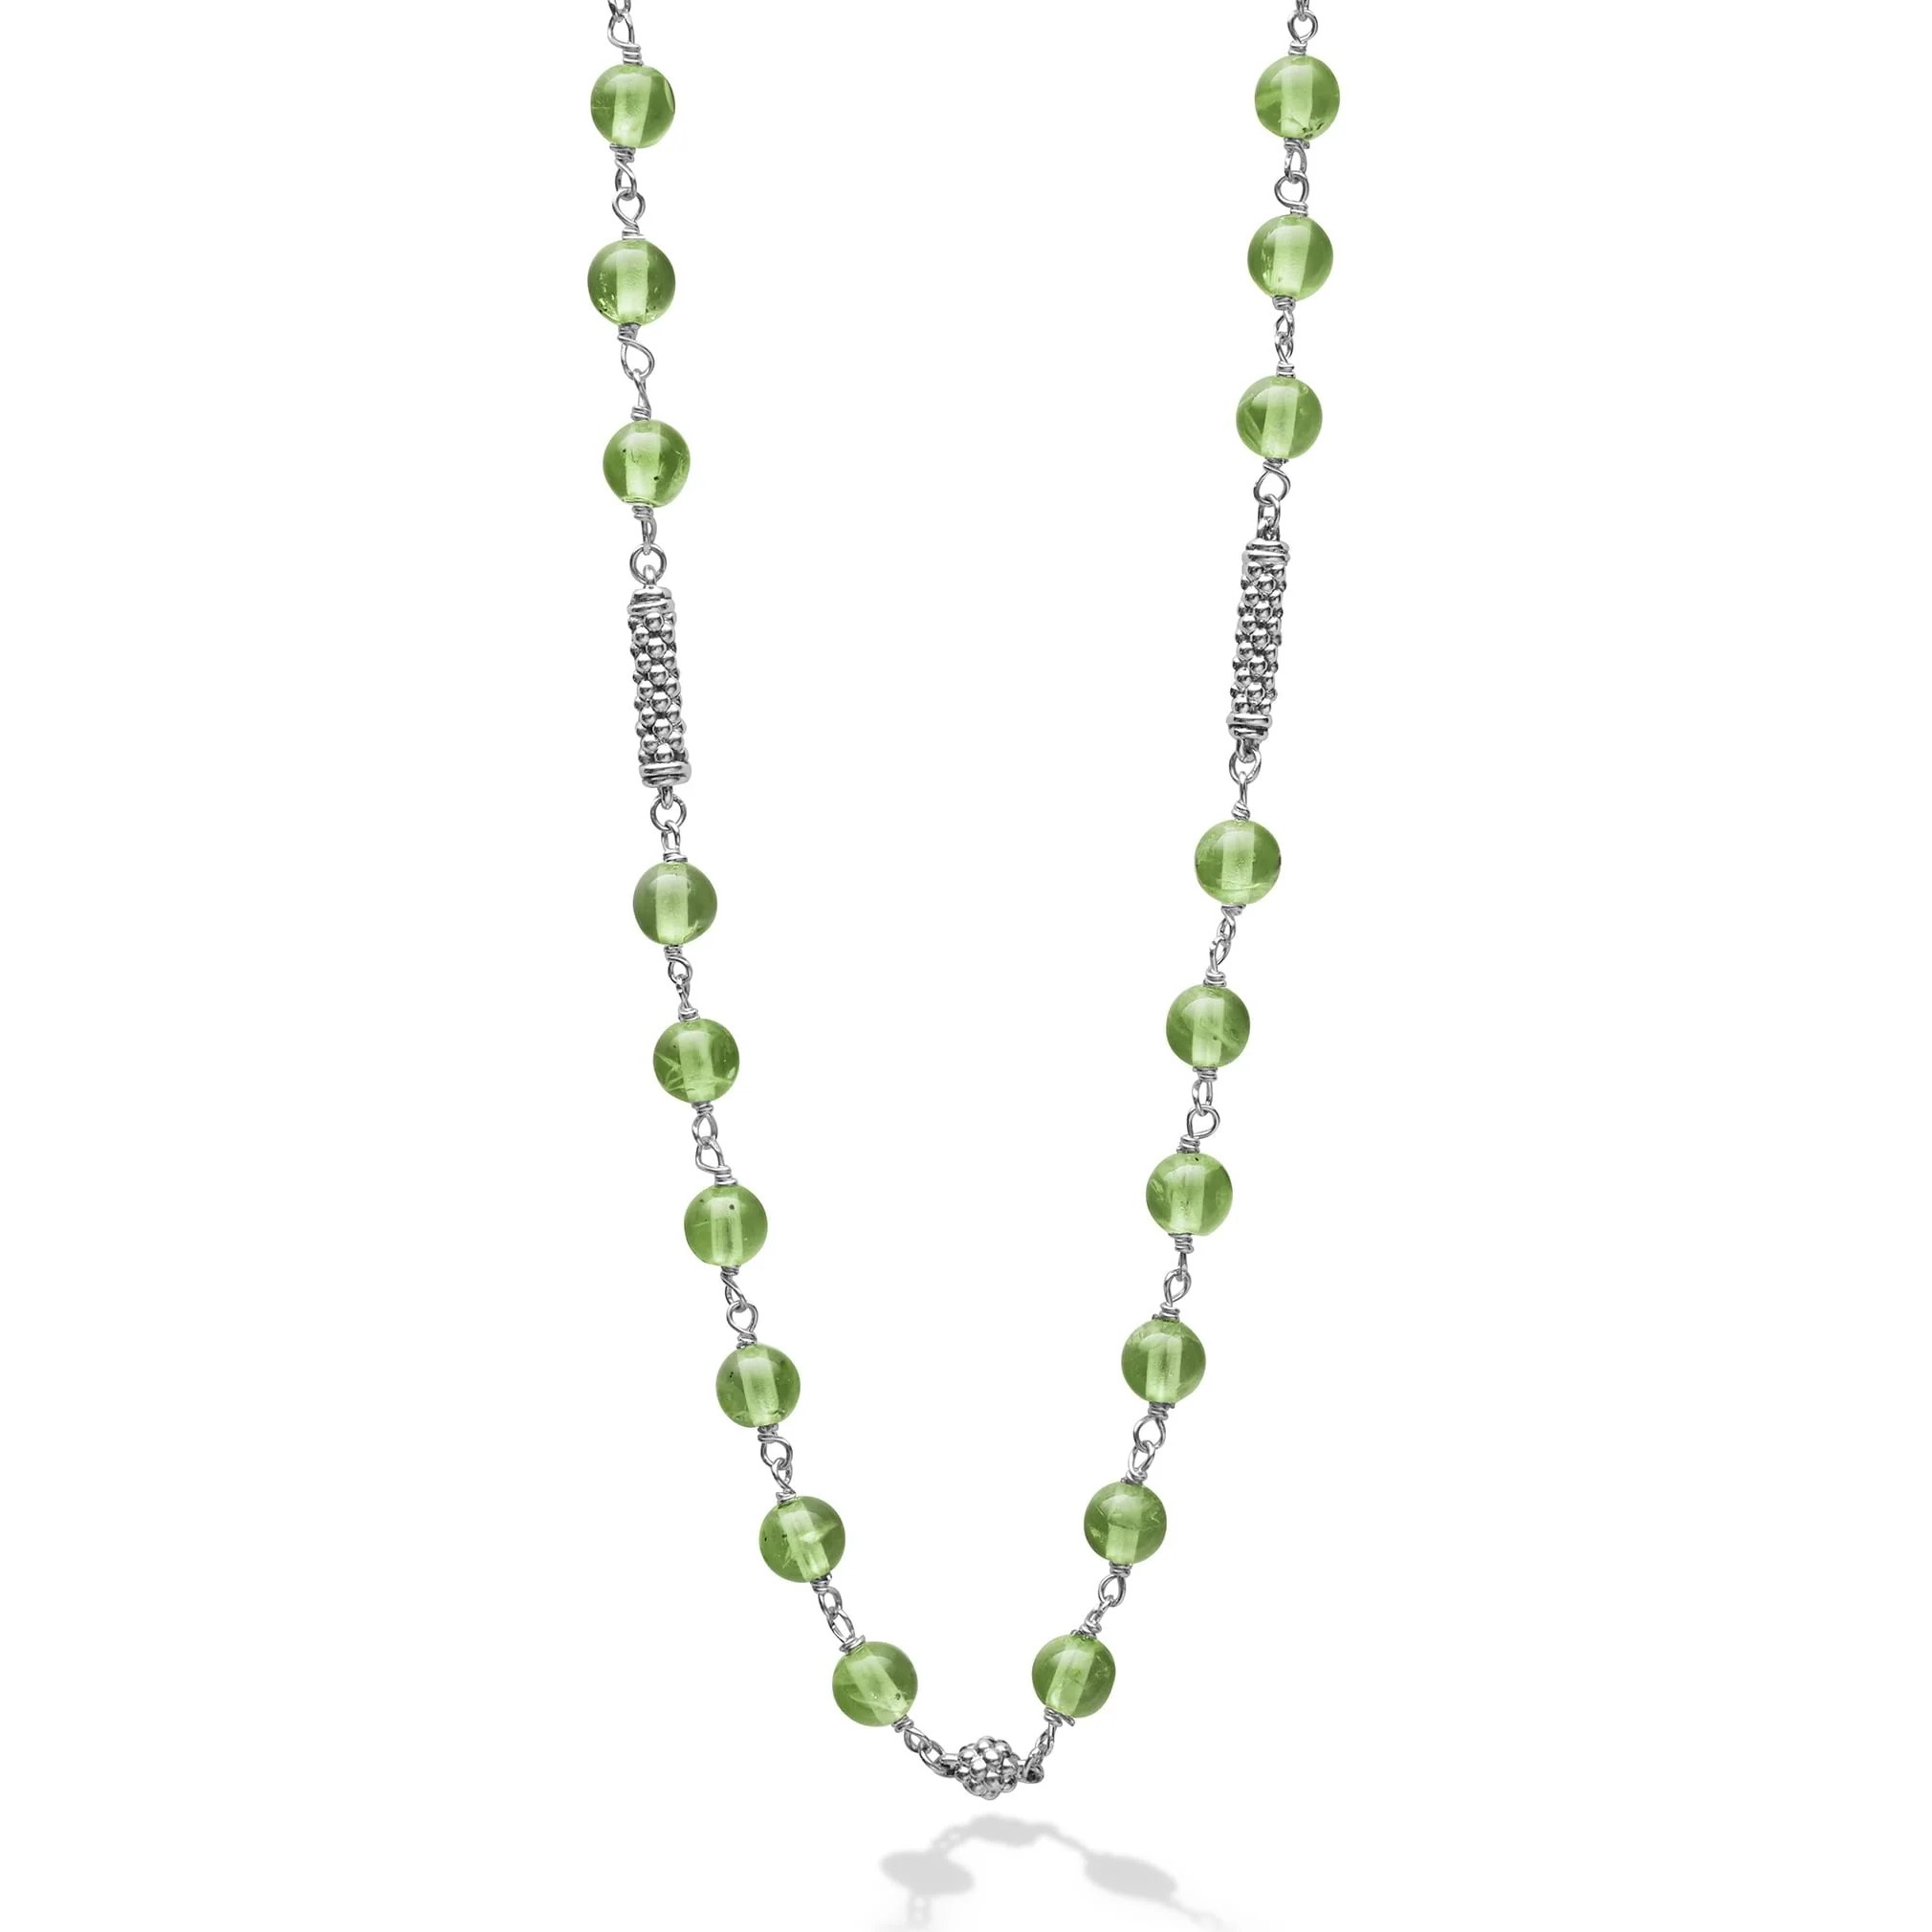 Lagos Sterling Silver Icon Necklace with 38 Smooth Peridot Beads 4mm Pigtail Link with Stations 16-18